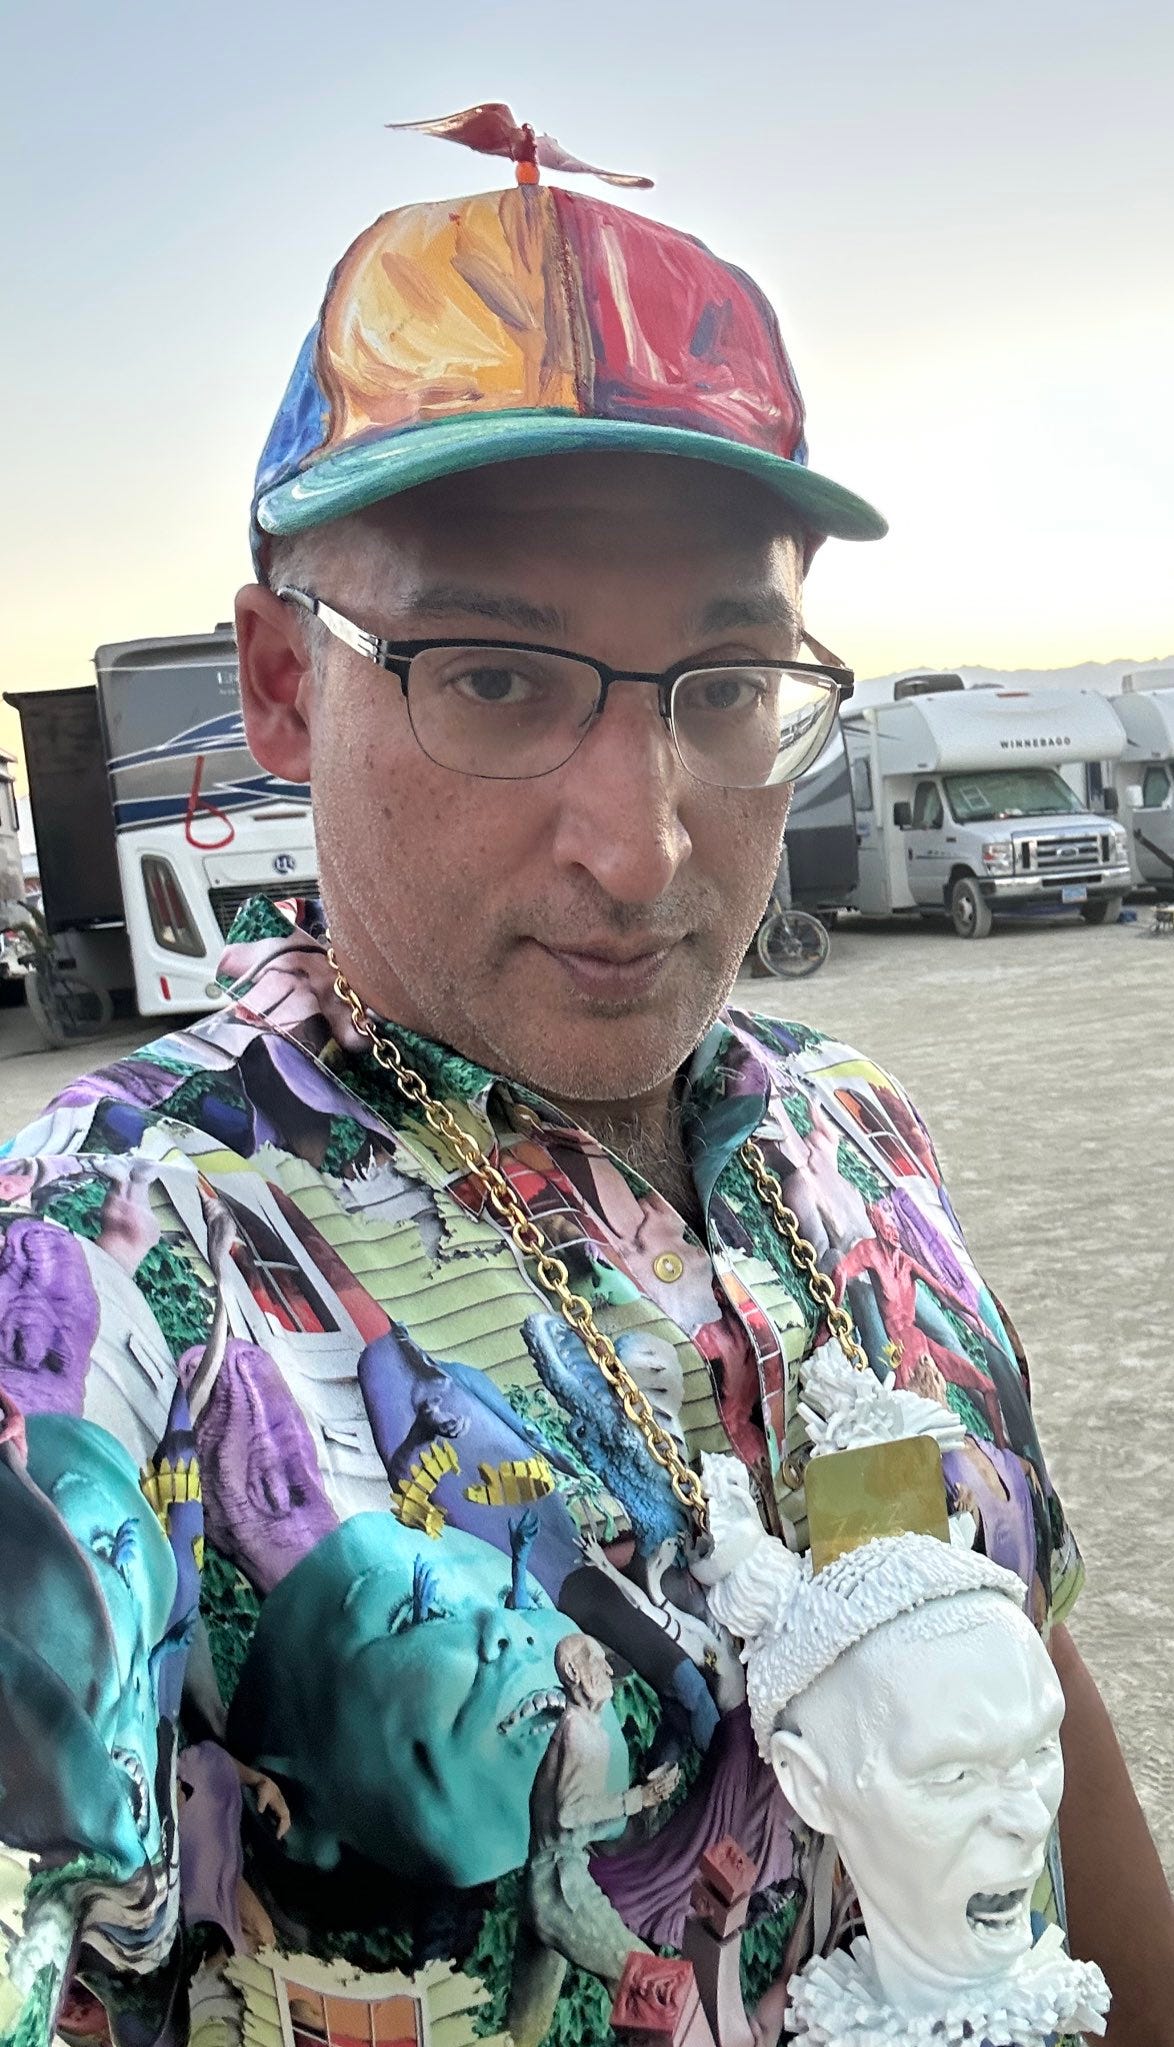 Selfie of Neal Katyal, a smug looking middle aged man wearing a paint-smeared style propellor beanie, an AI nightmare print shirt, and a gold chain with a large white bust of a screaming head (????) hanging from his neck. In the background is a line of dusty Winnebagos redolent of America’s most self-absorbed temporary desert RV park, Burning Man. His face looks like he’s about to say “My lover and I saw you from across the bar and we really dig your vibe.”